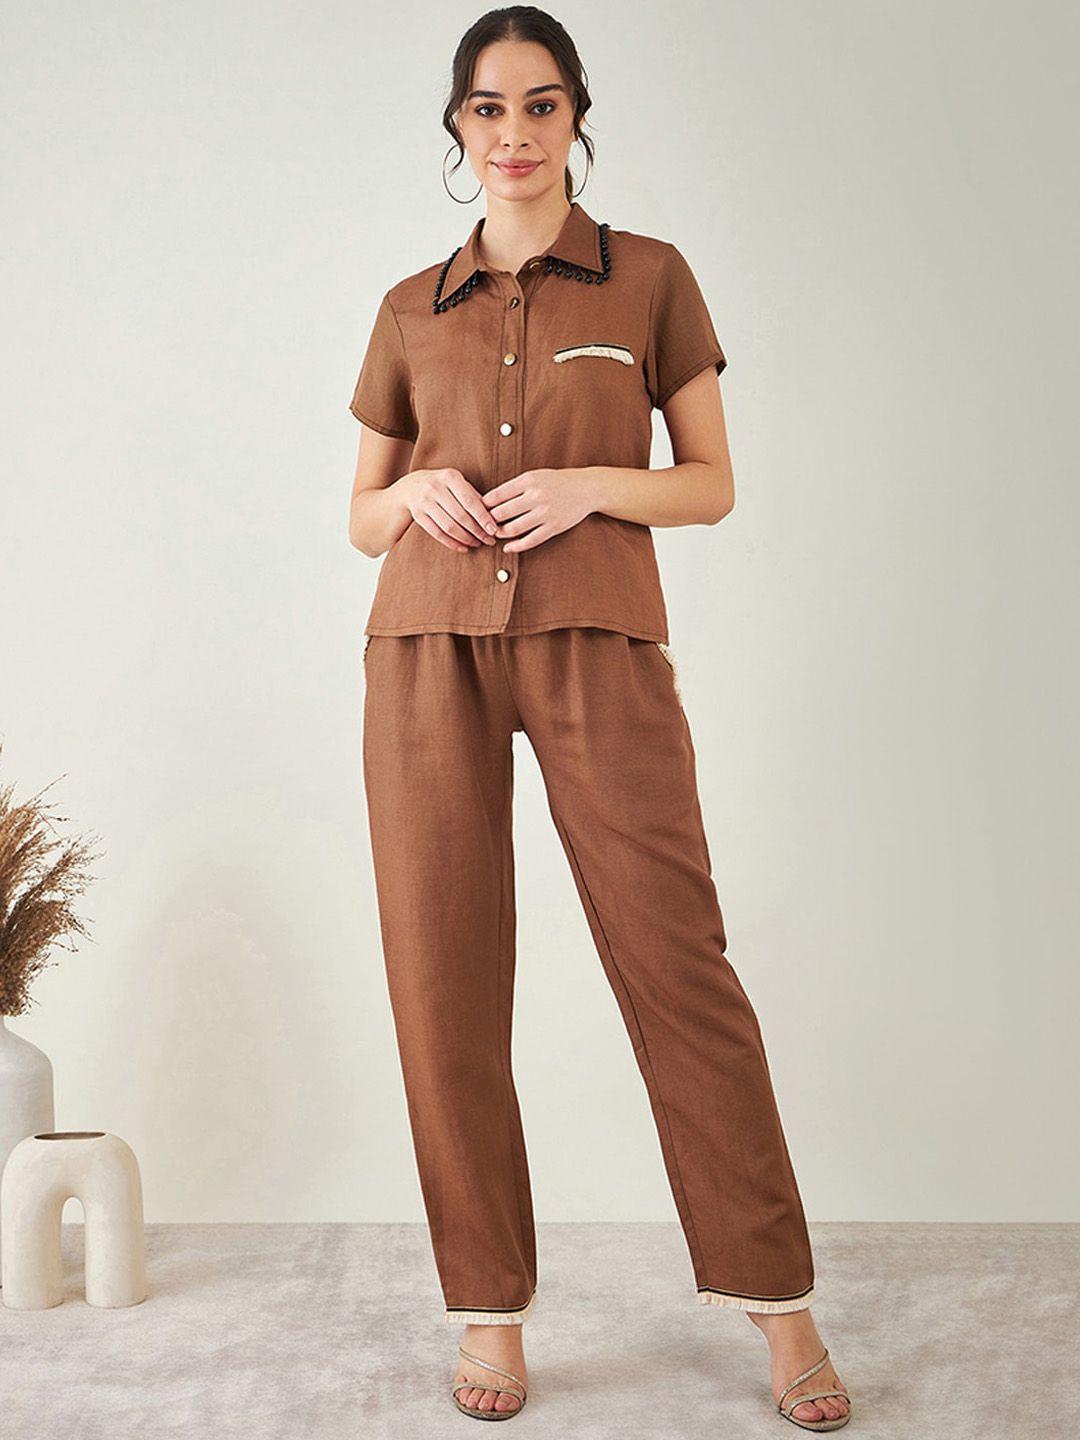 first resort by ramola bachchan relaxed fit  collar neck top & mid-rise trouser co-ords